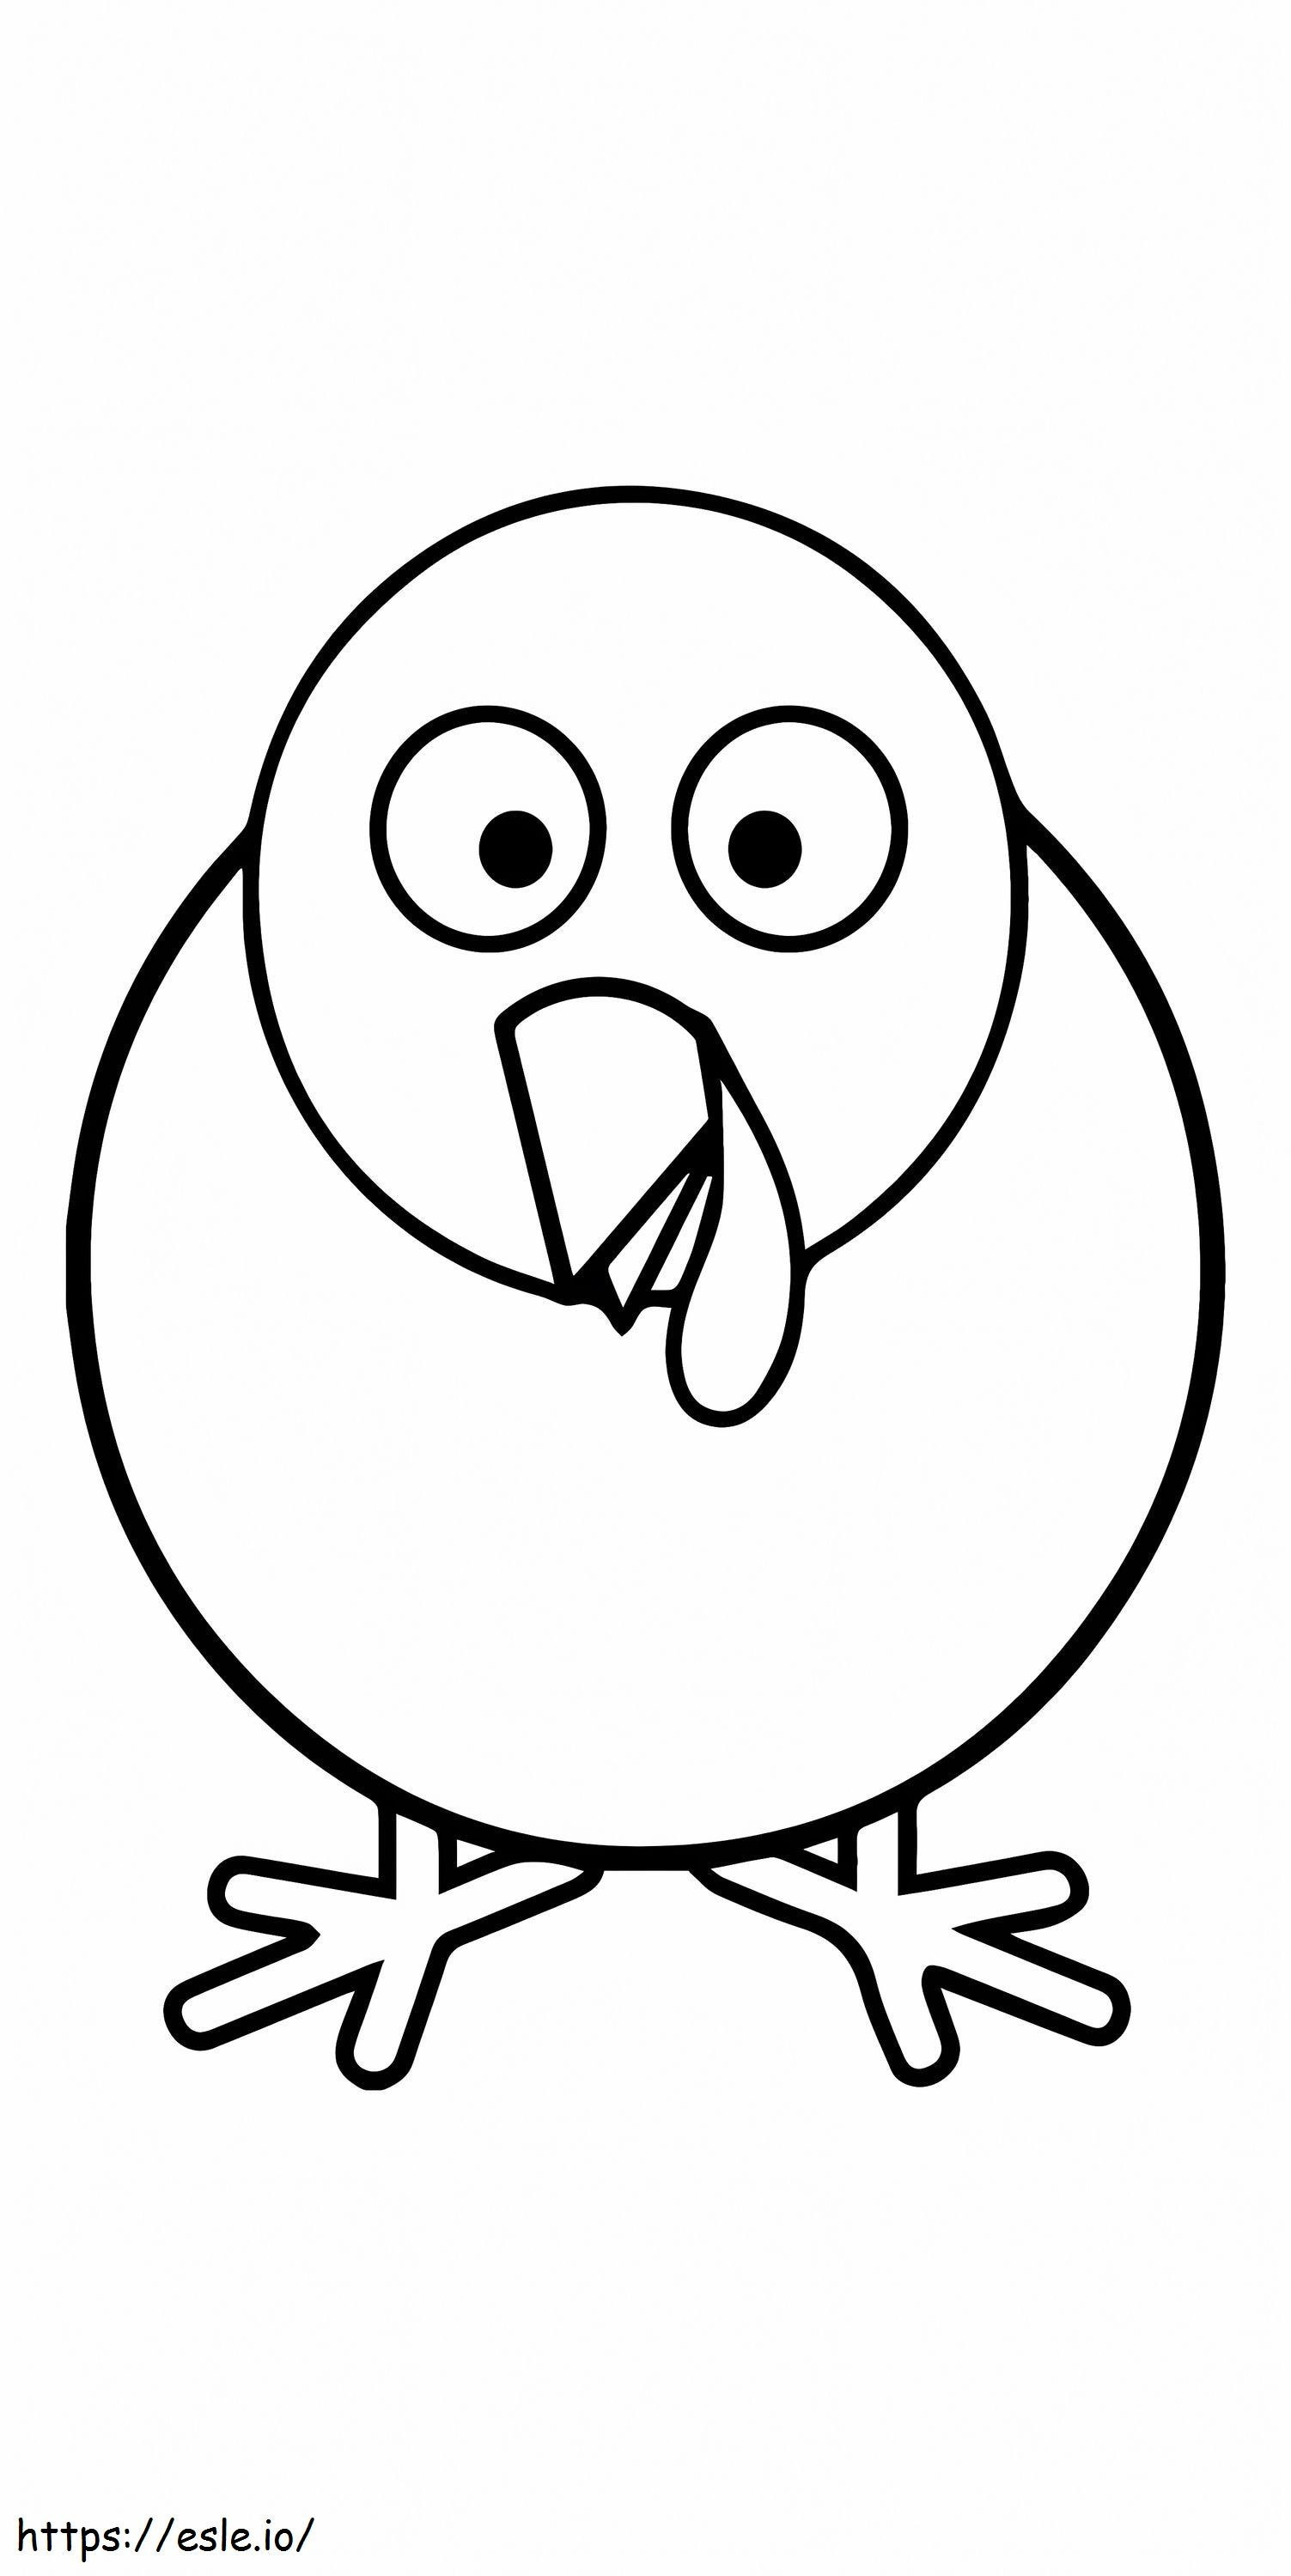 Round Turkey coloring page